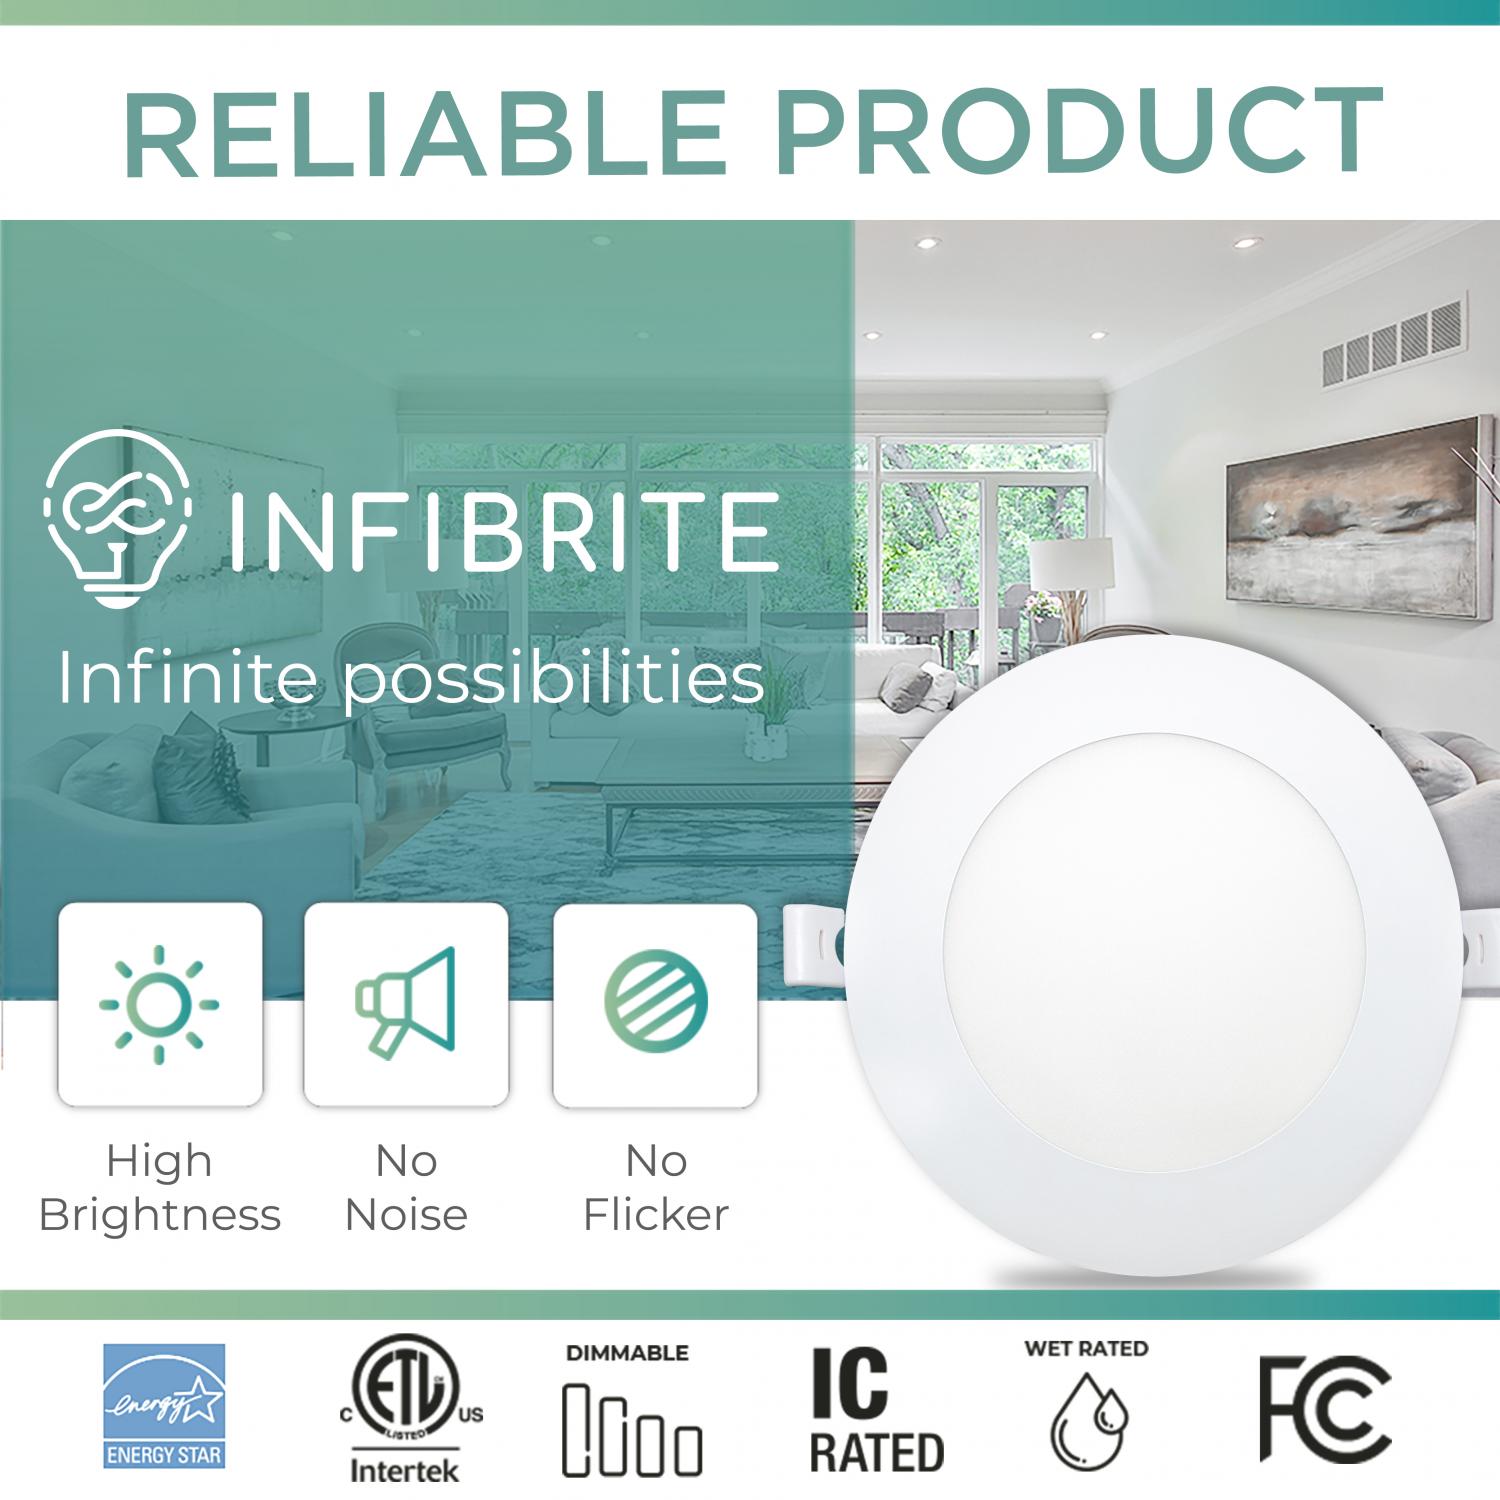 Infibrite 4 Inch 3000K Warm White 9W 750 LM Ultra-Slim LED Ceiling Light with Junction Box, Flush Mount, Dimmable, Fixture for Bedroom, Wet Rated for Bathroom, Easy Install, 75W Eqv, ETL & Energy Star, US Company